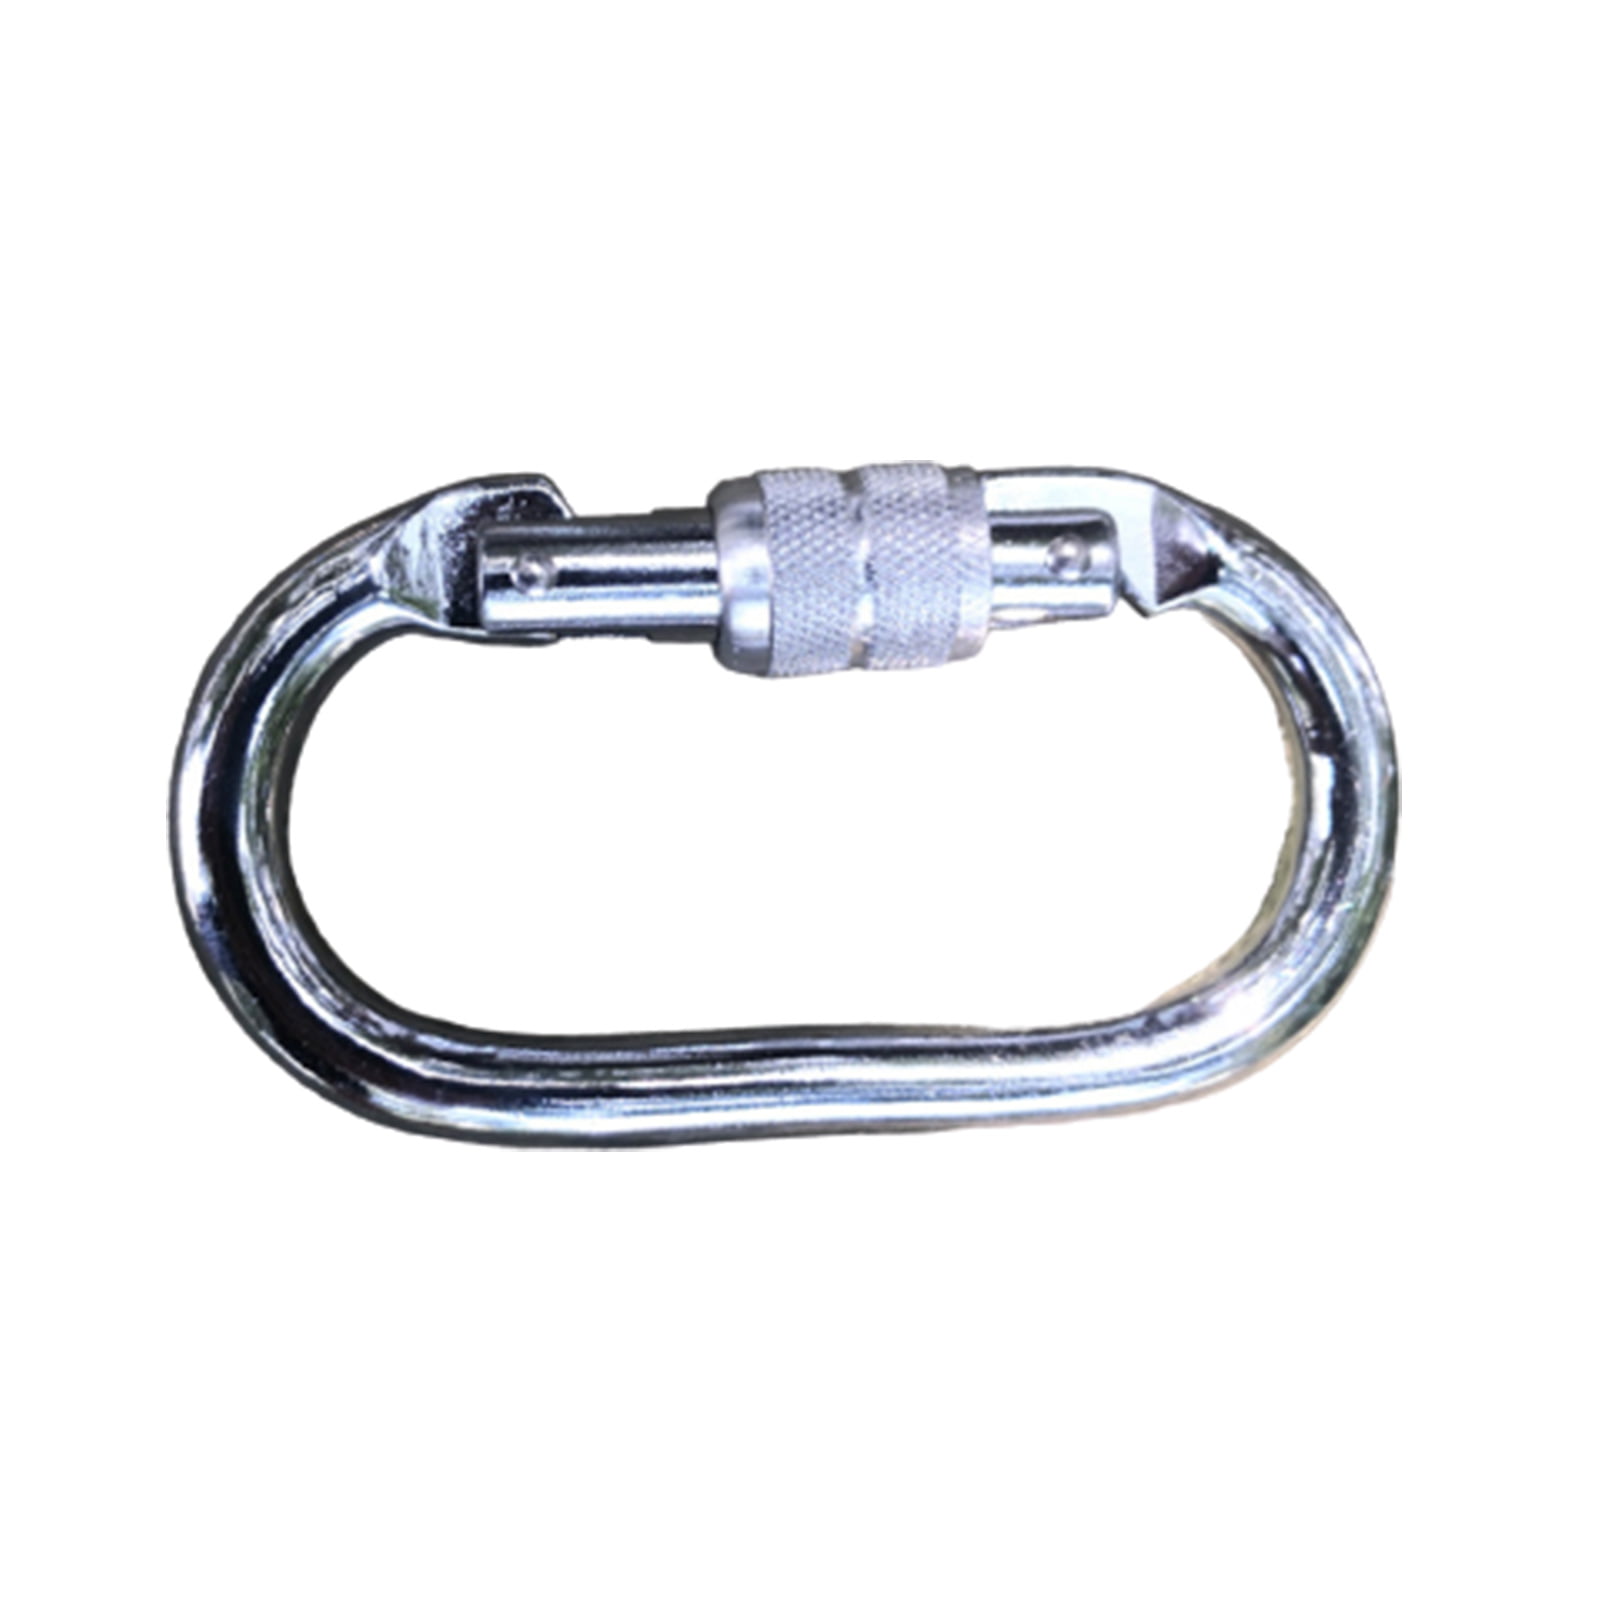 Heavy Duty Carabiner Keychain Round Oval Ring Climbing Carabiner Clip  Stainless Steel Snap Hook Carabiner Hook For Dog Bag Horse - Hooks -  AliExpress